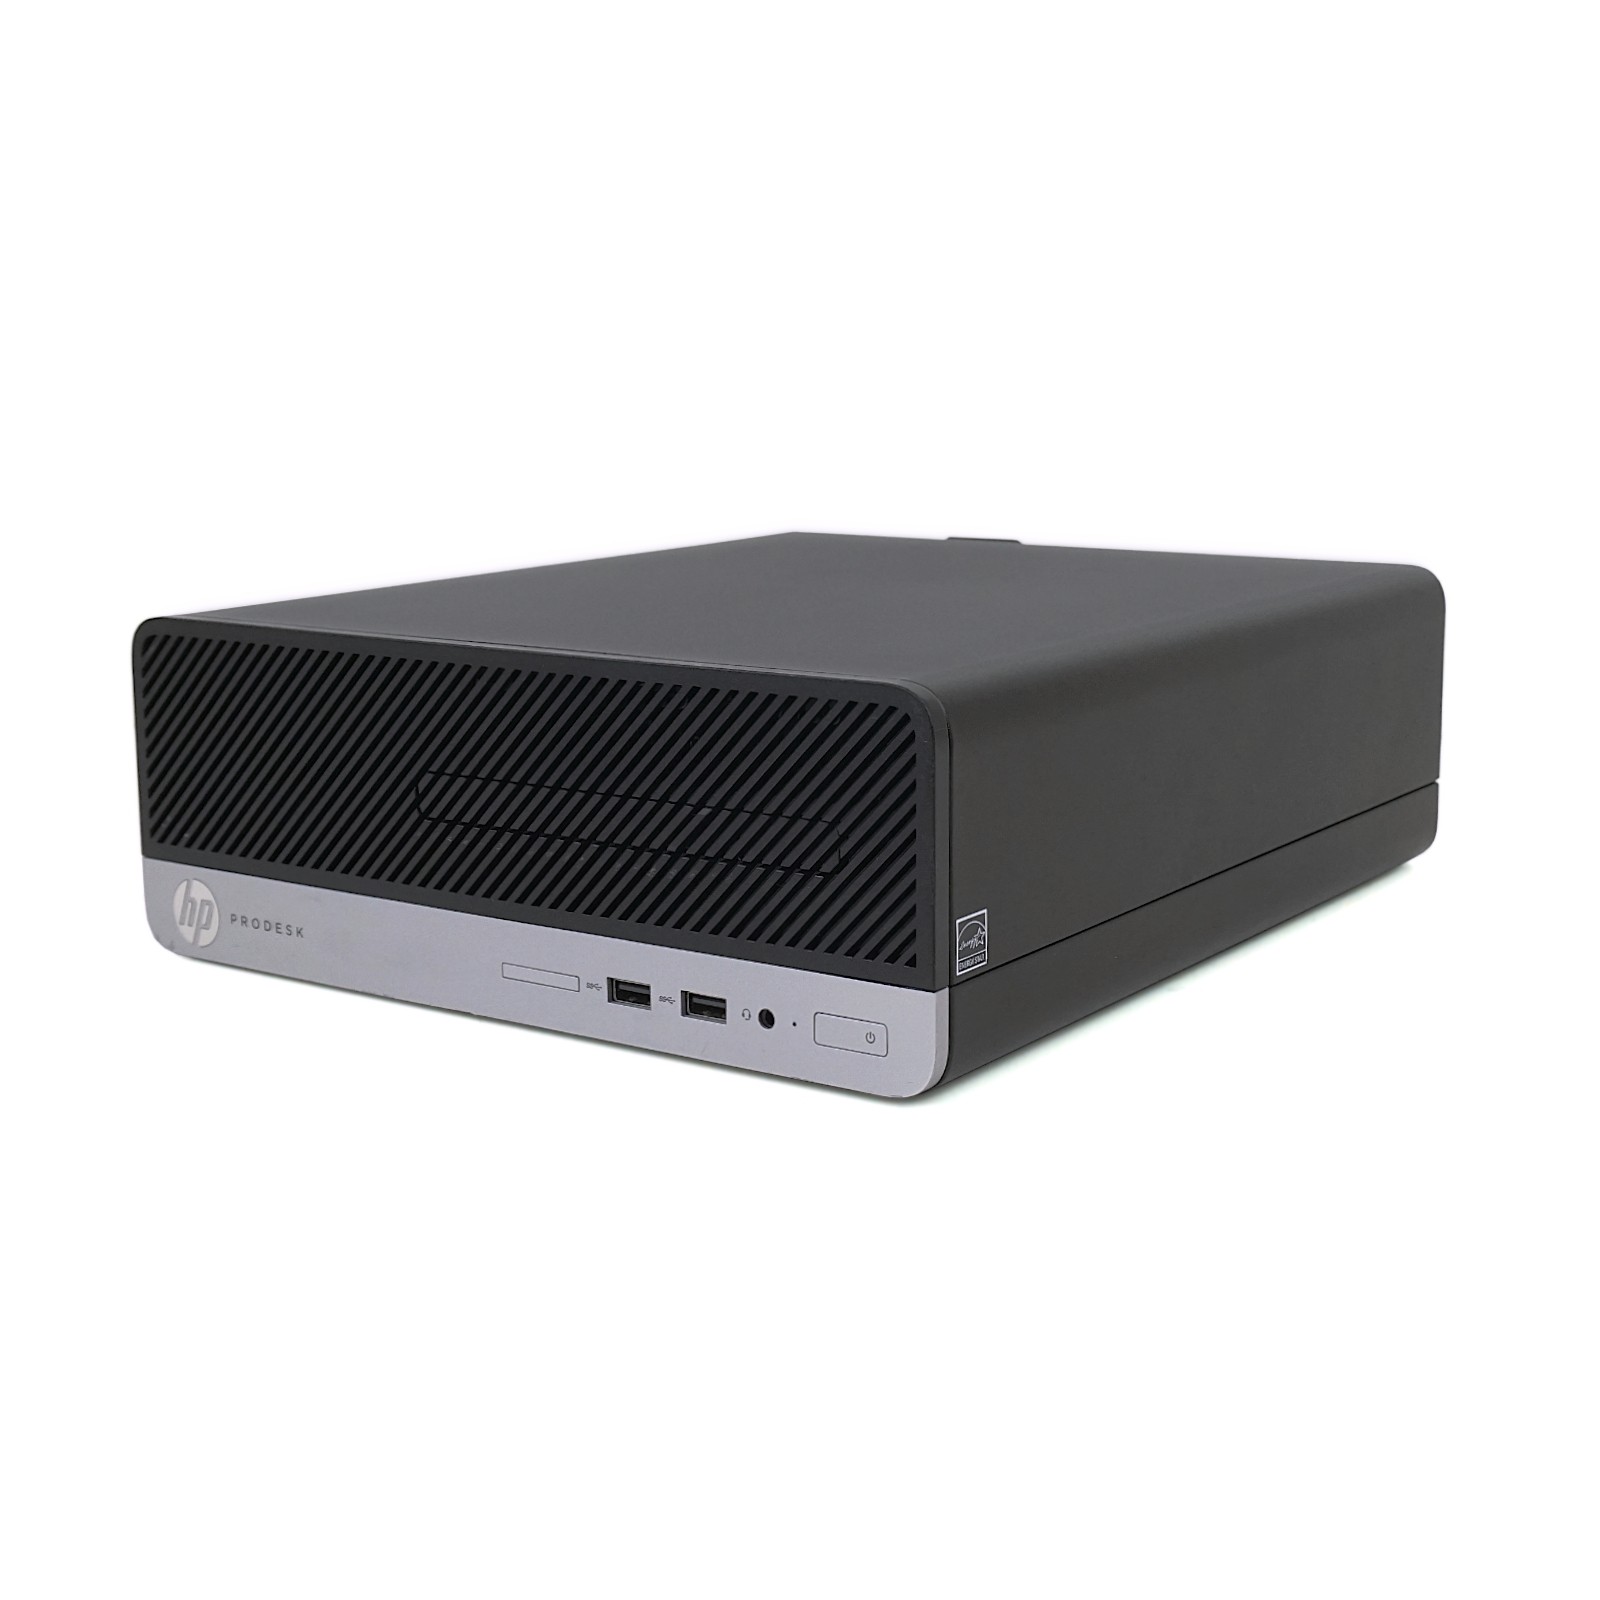 Replace the System Memory, HP ProDesk 400 SFF G5 Desktop PC